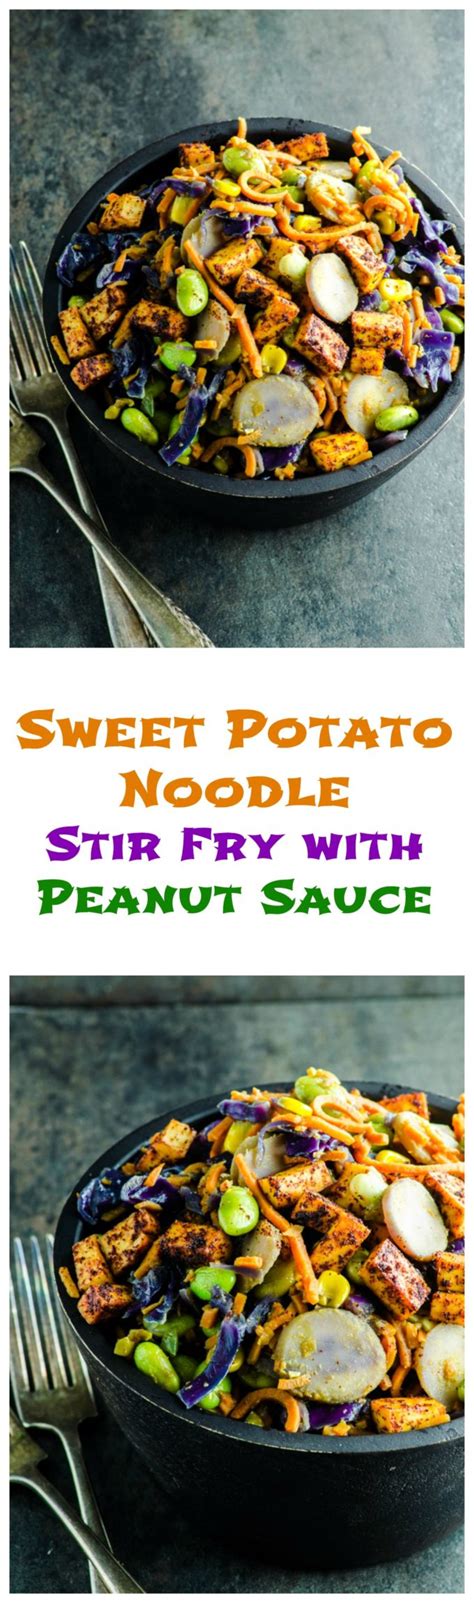 Here's how to make sweet potato fries: Sweet Potato Noodles Stir Fry with Peanut Sauce - May I ...